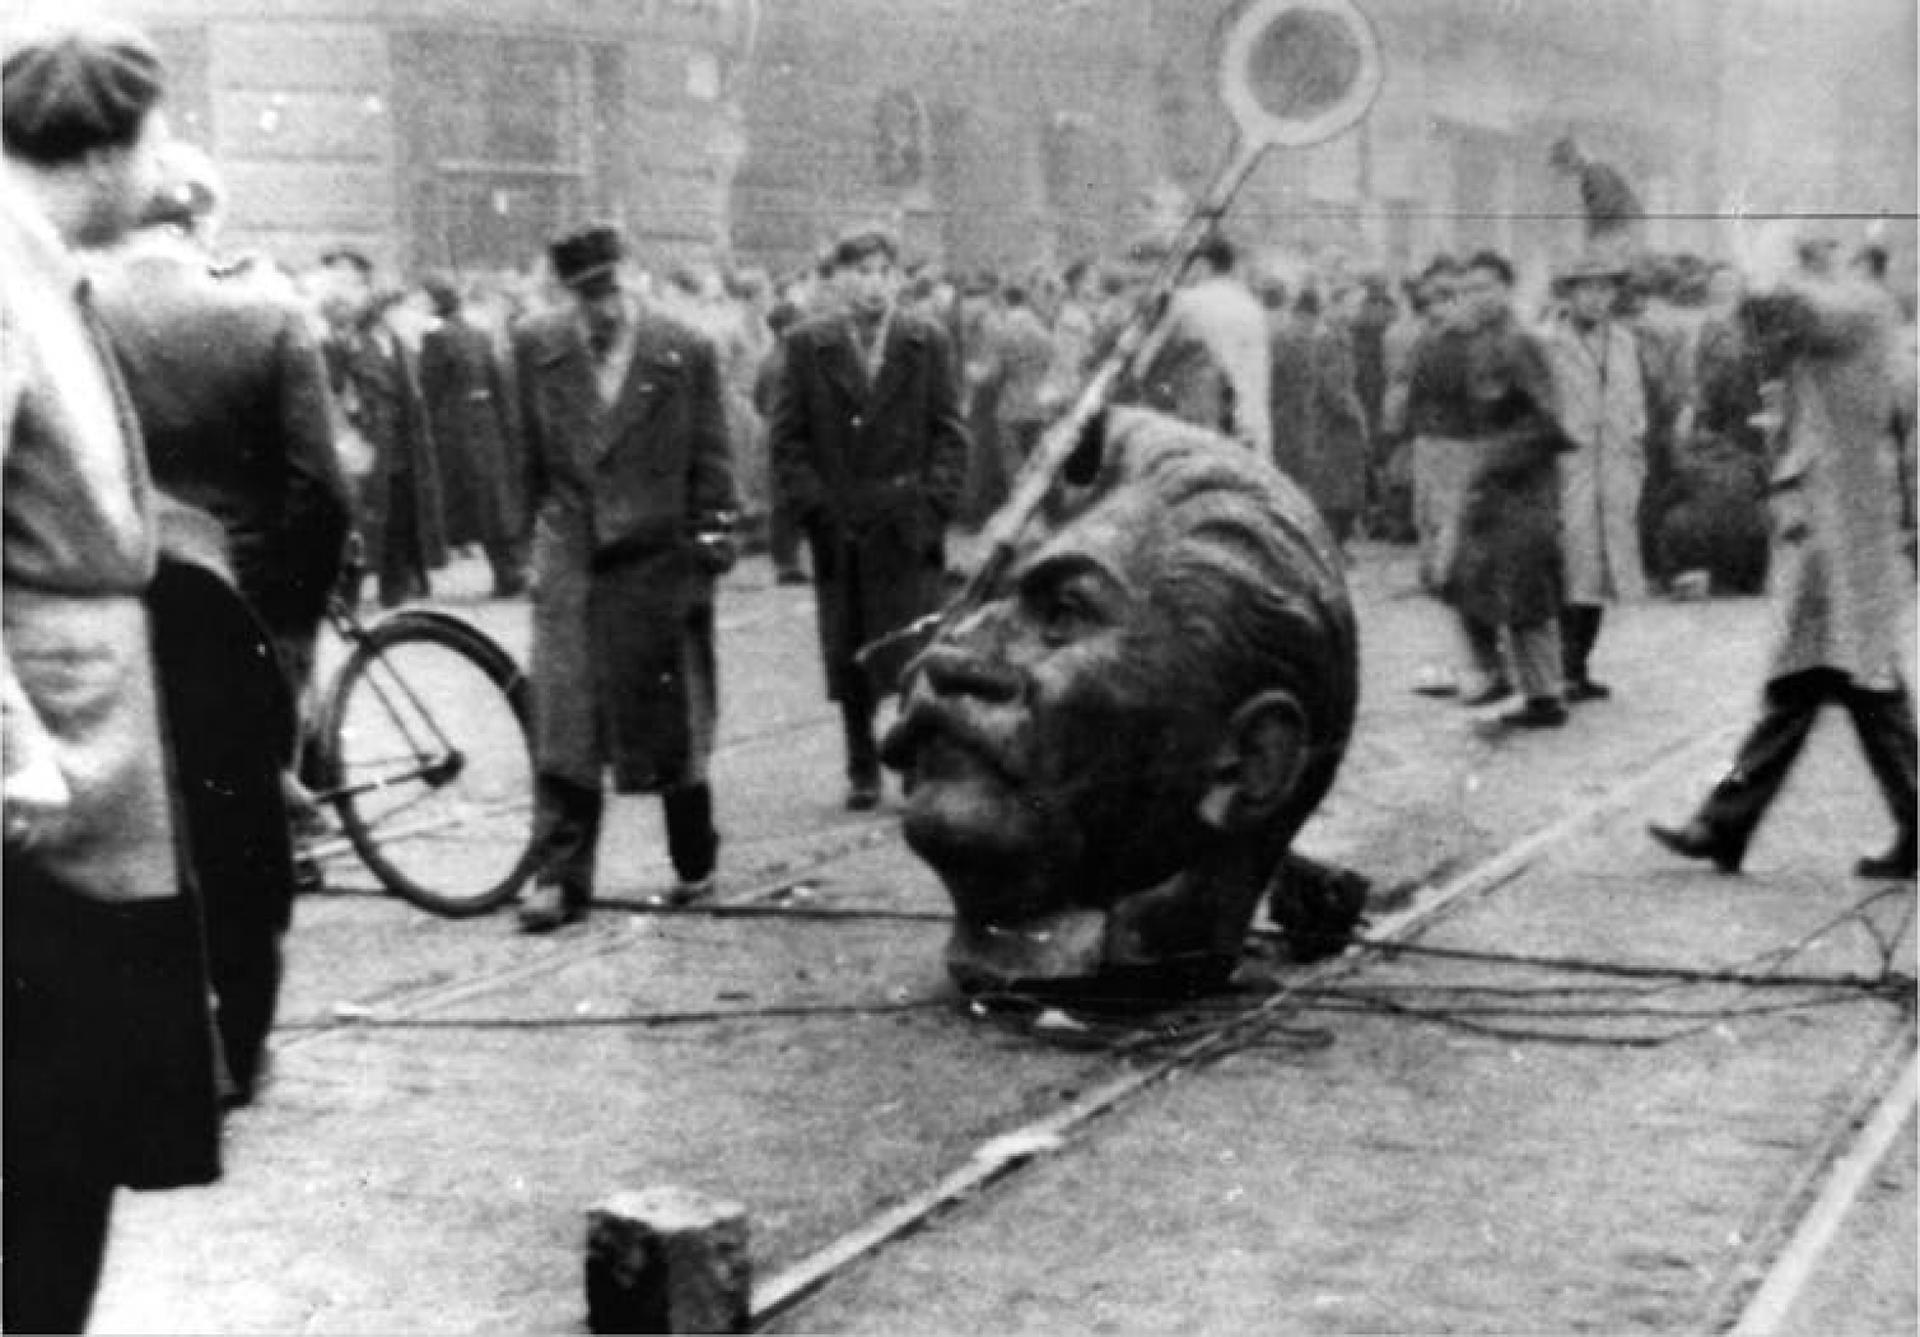 A statue of Stalin's head is on the ground during a revolution in Hungary.